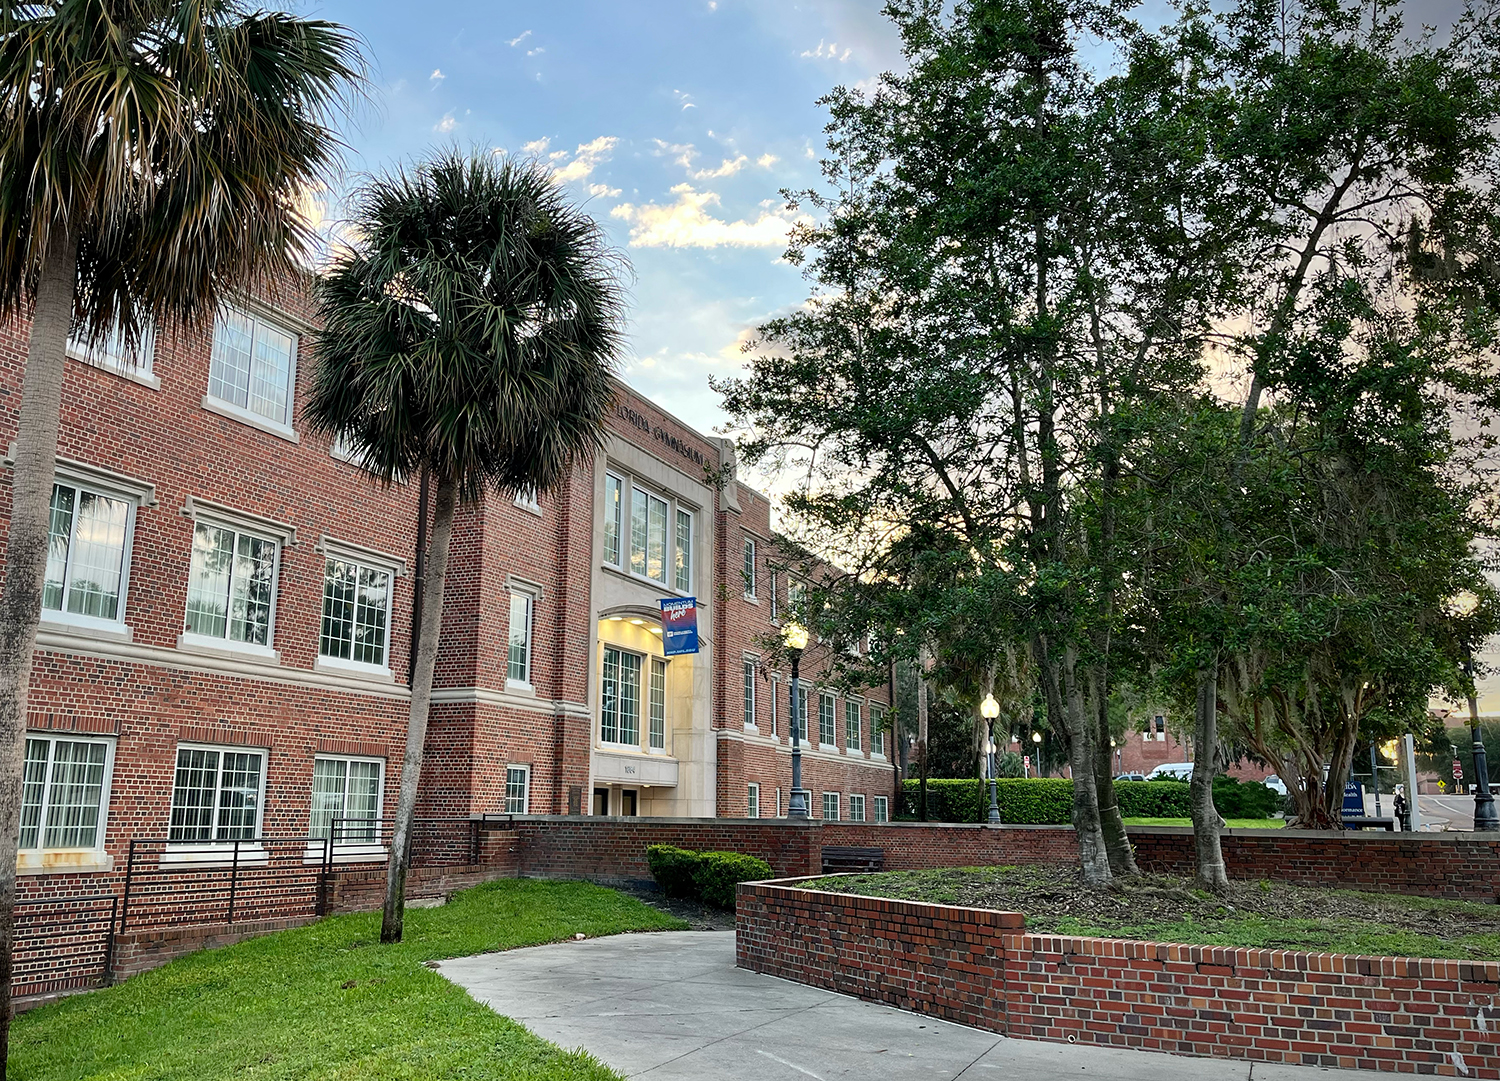 The Florida Gym on the University of Florida campus